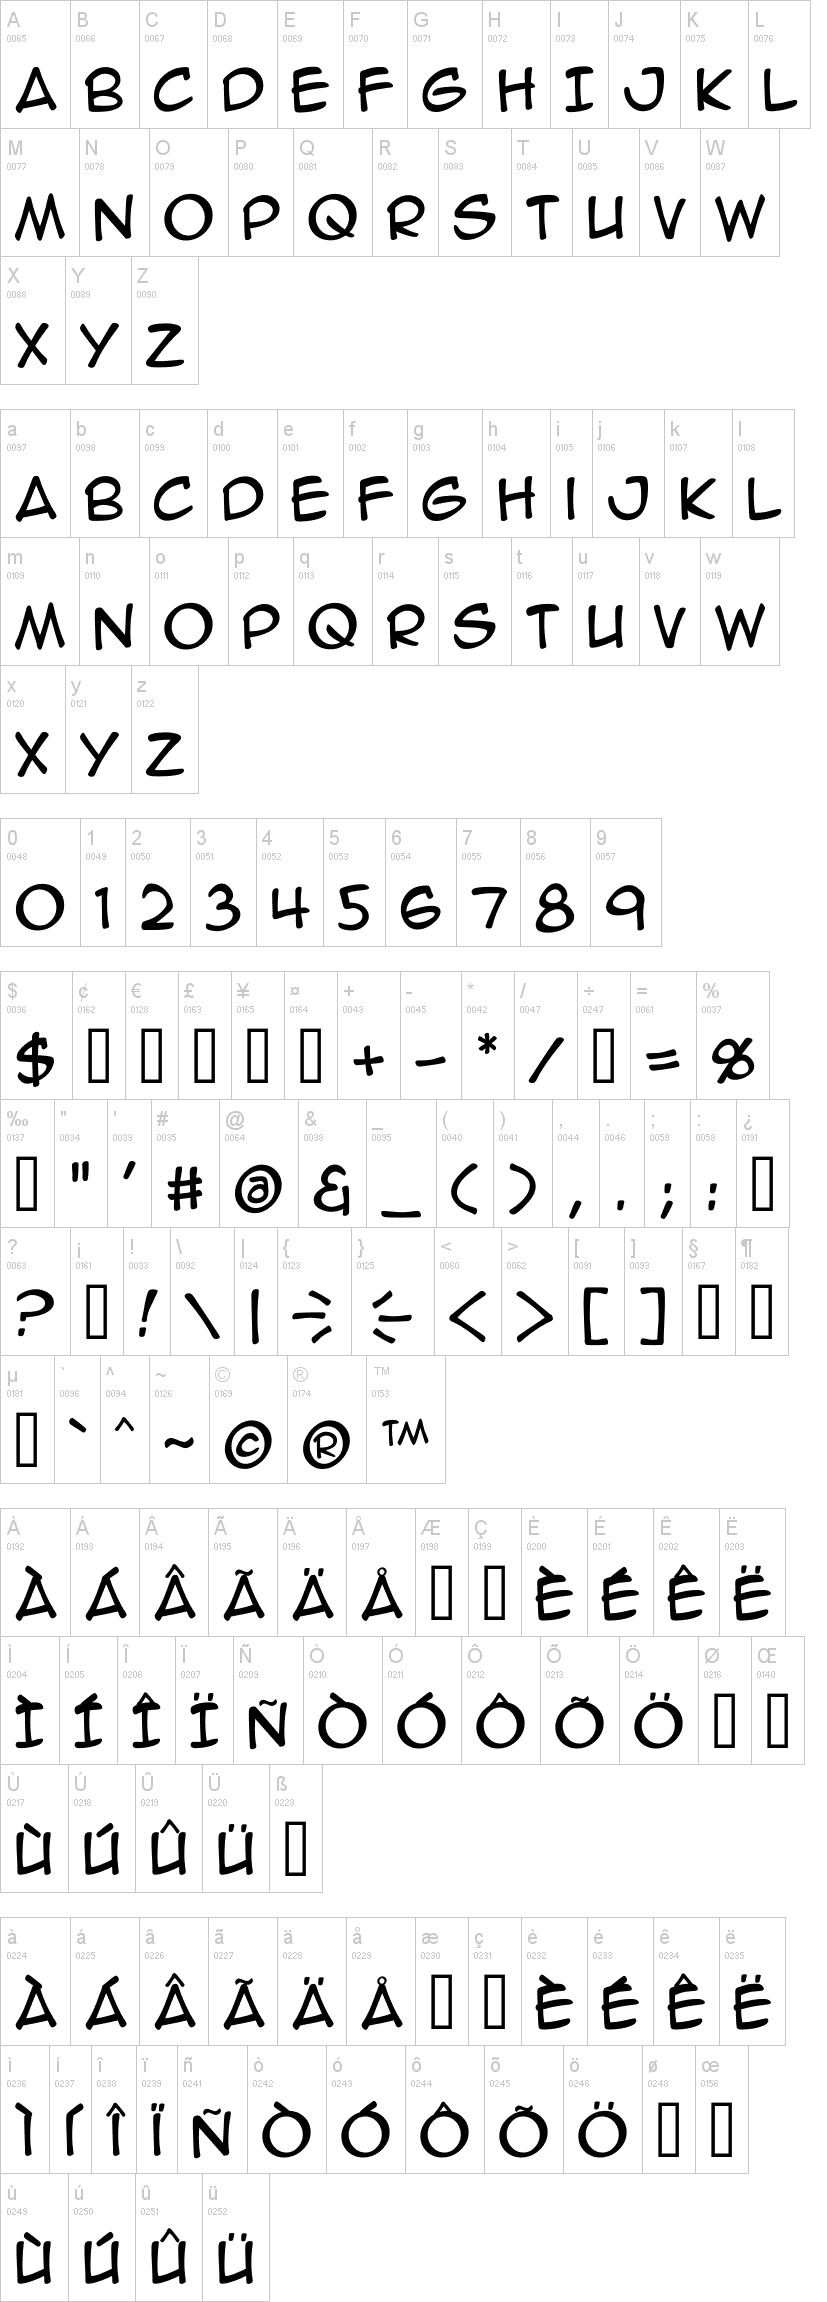 what font is used for manga